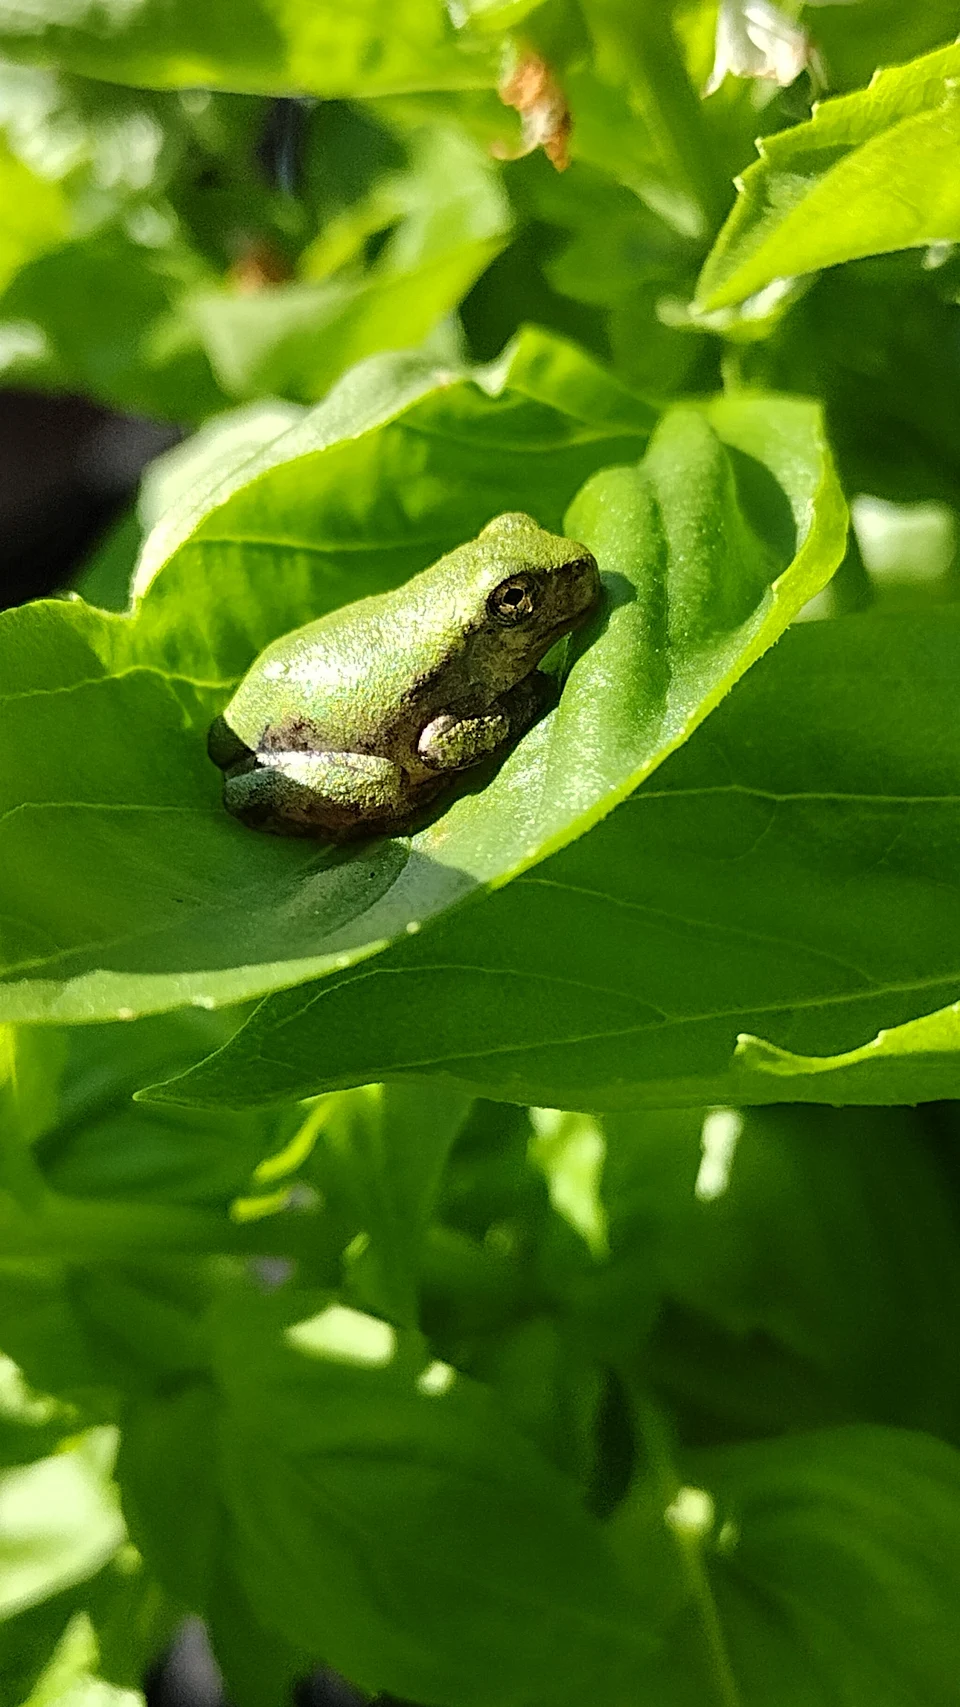 A little frog friend on my basil this morning.